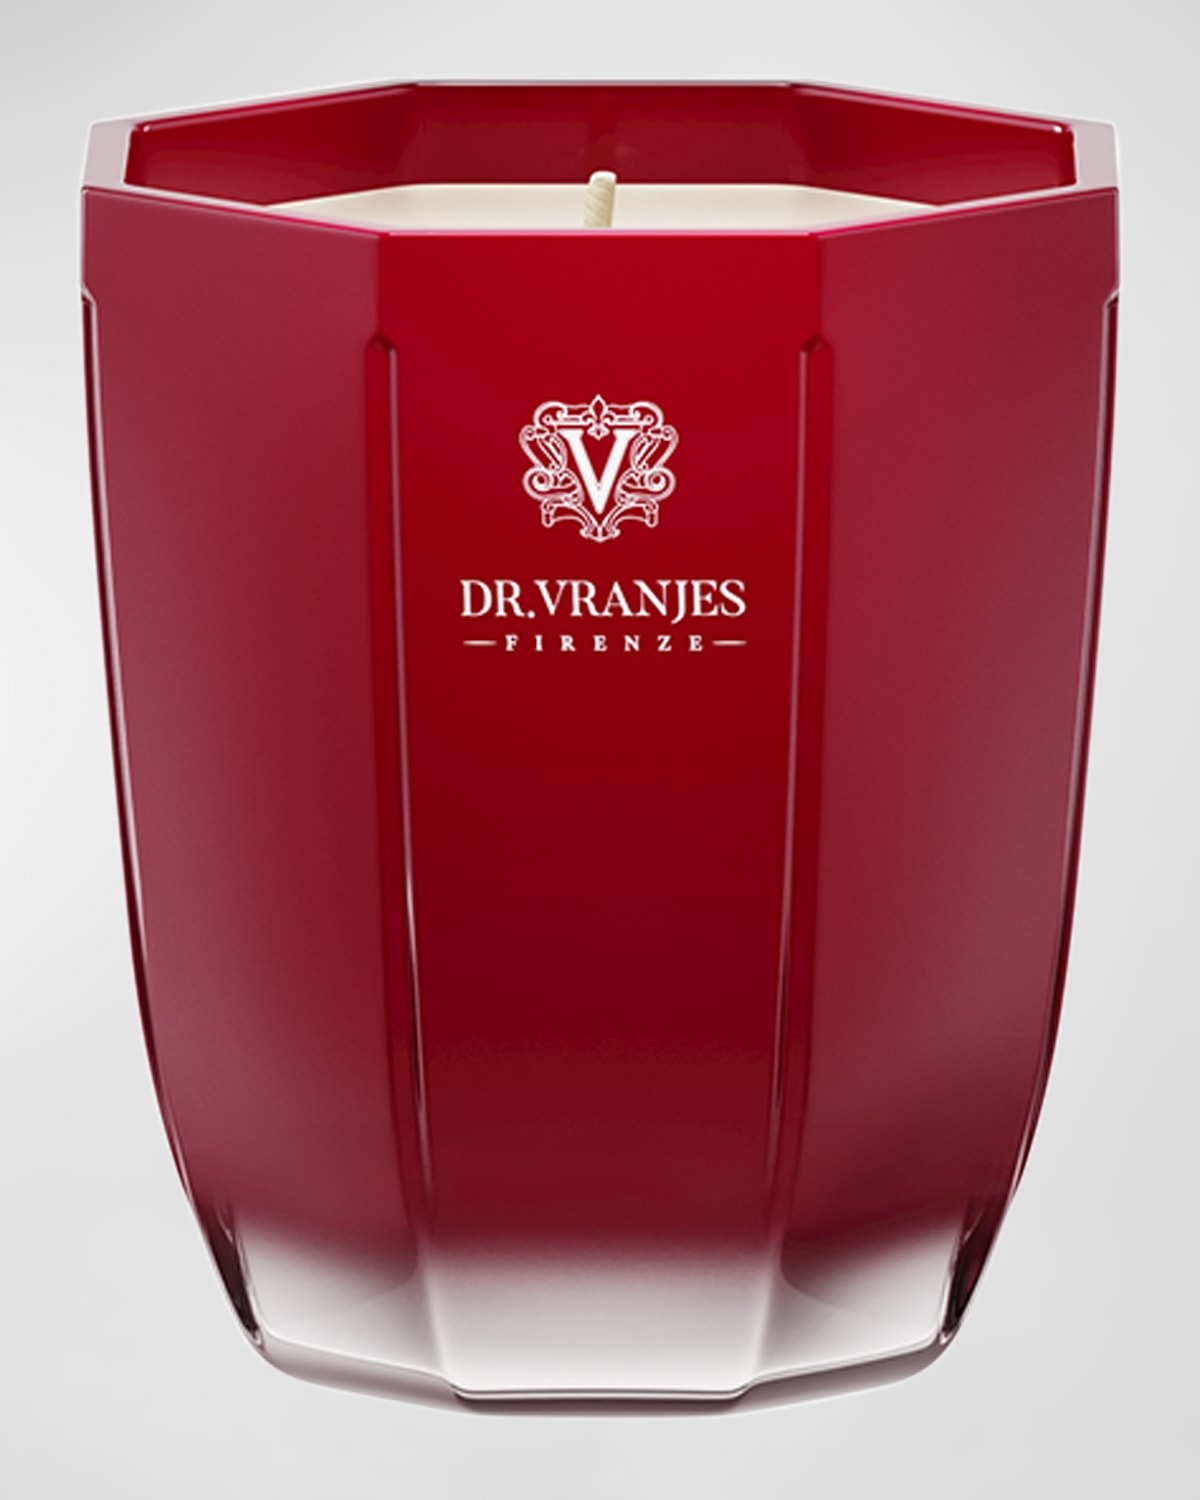 7 oz. Rosso Nobile Tormalina Candle